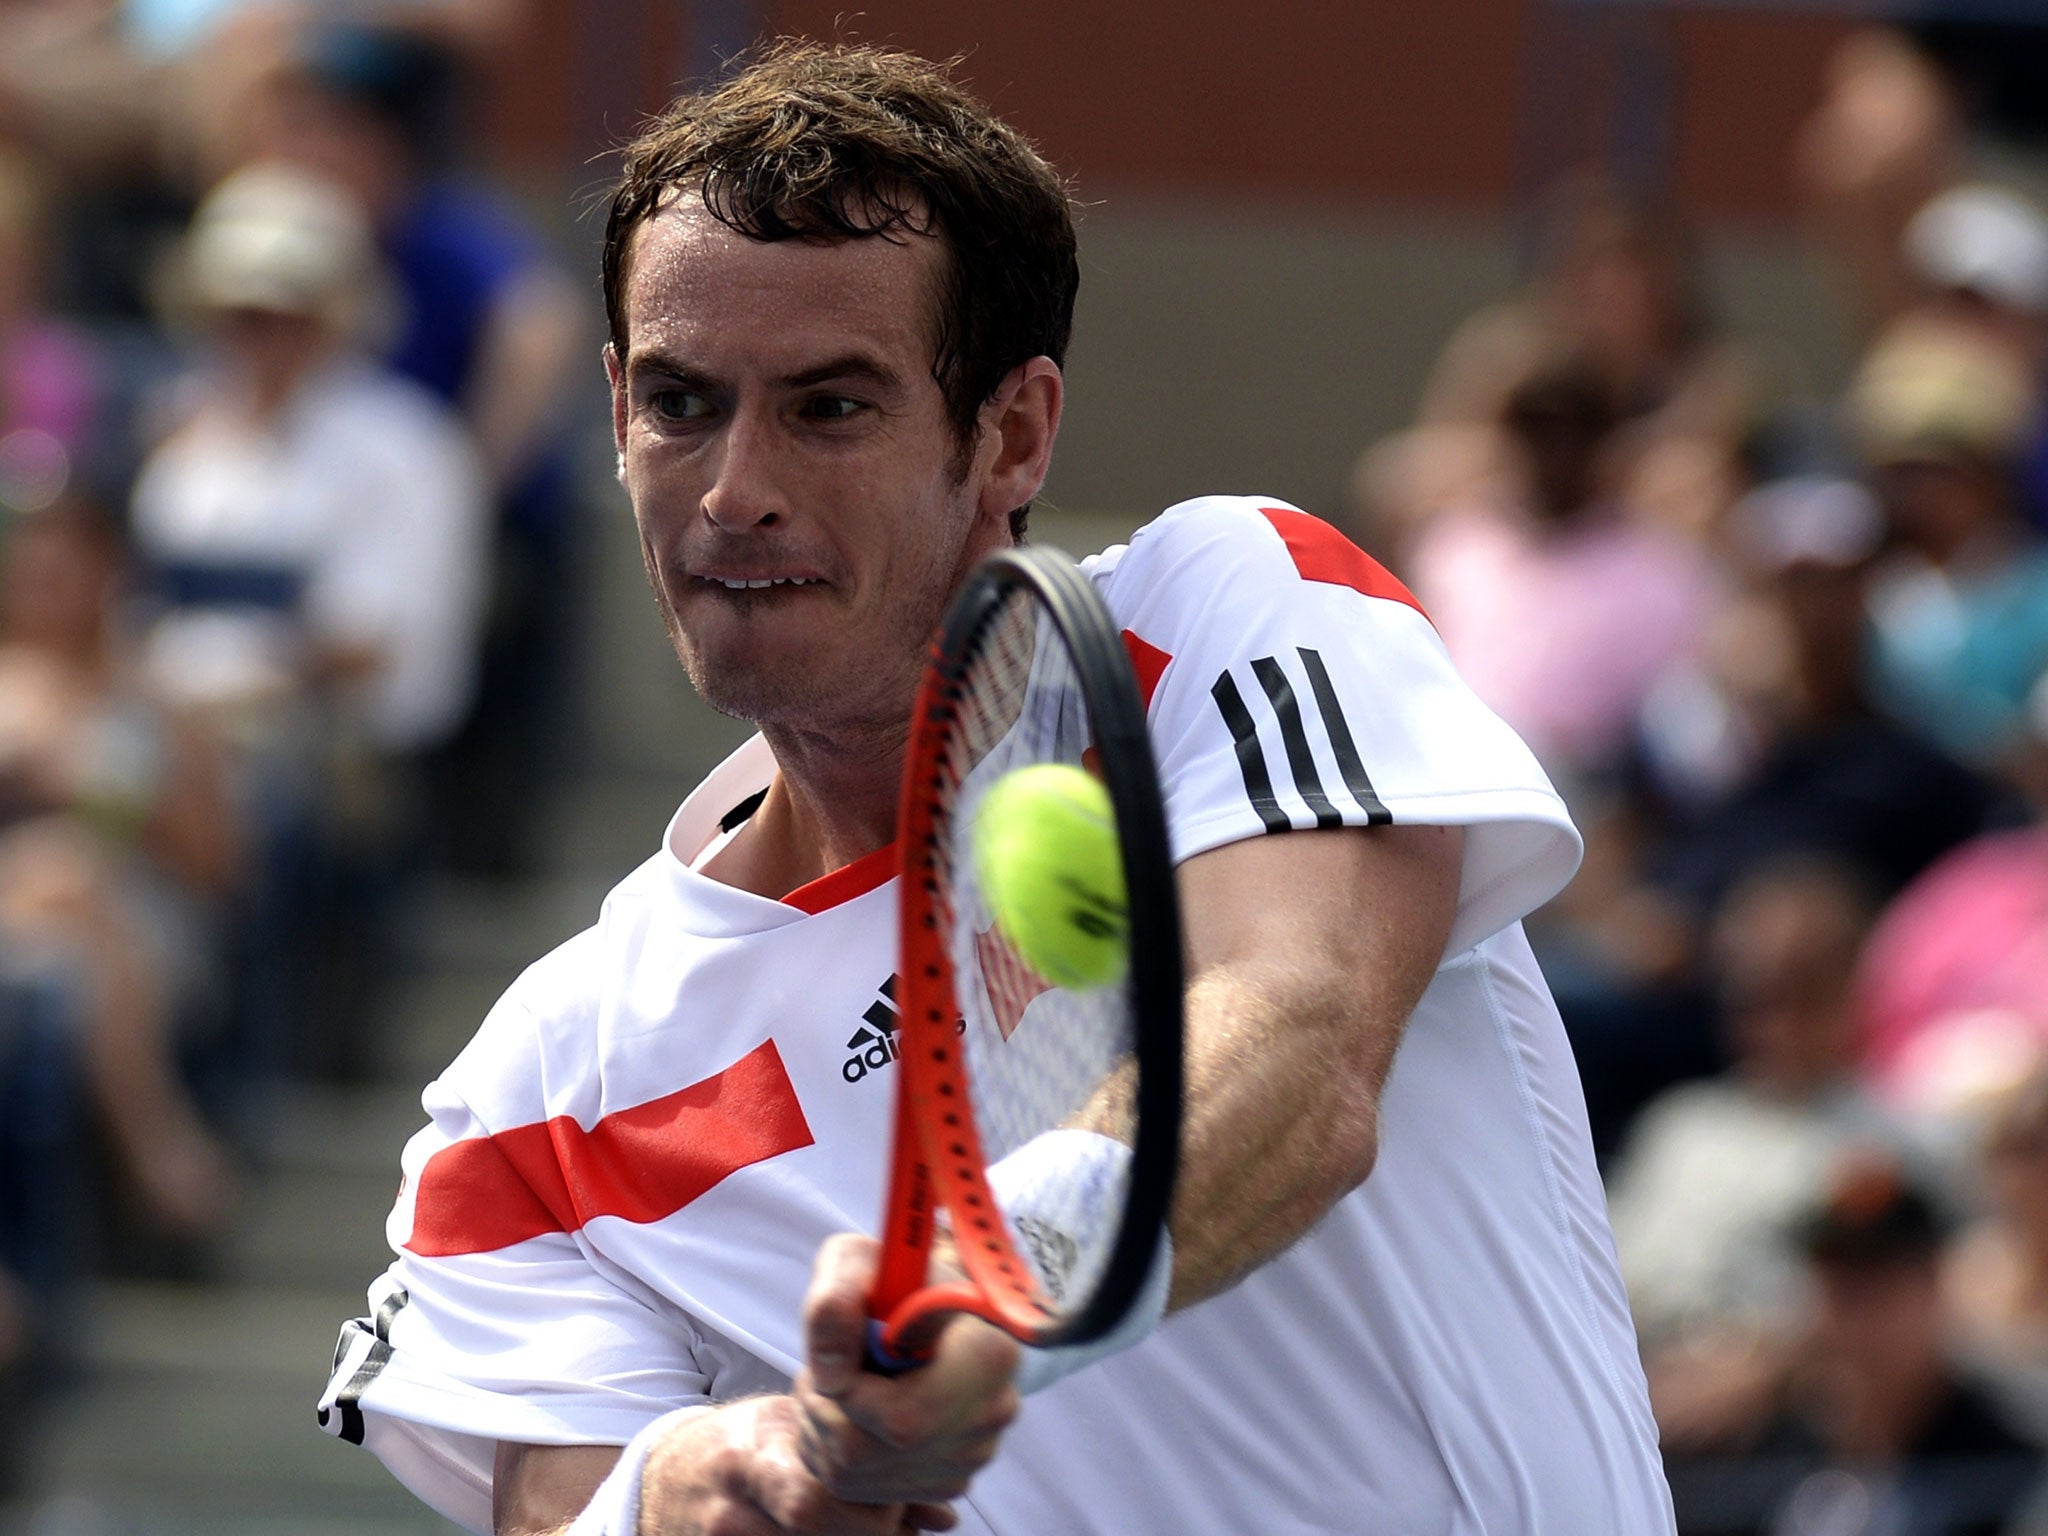 Andy Murray hits a return during his win over Florian Mayer